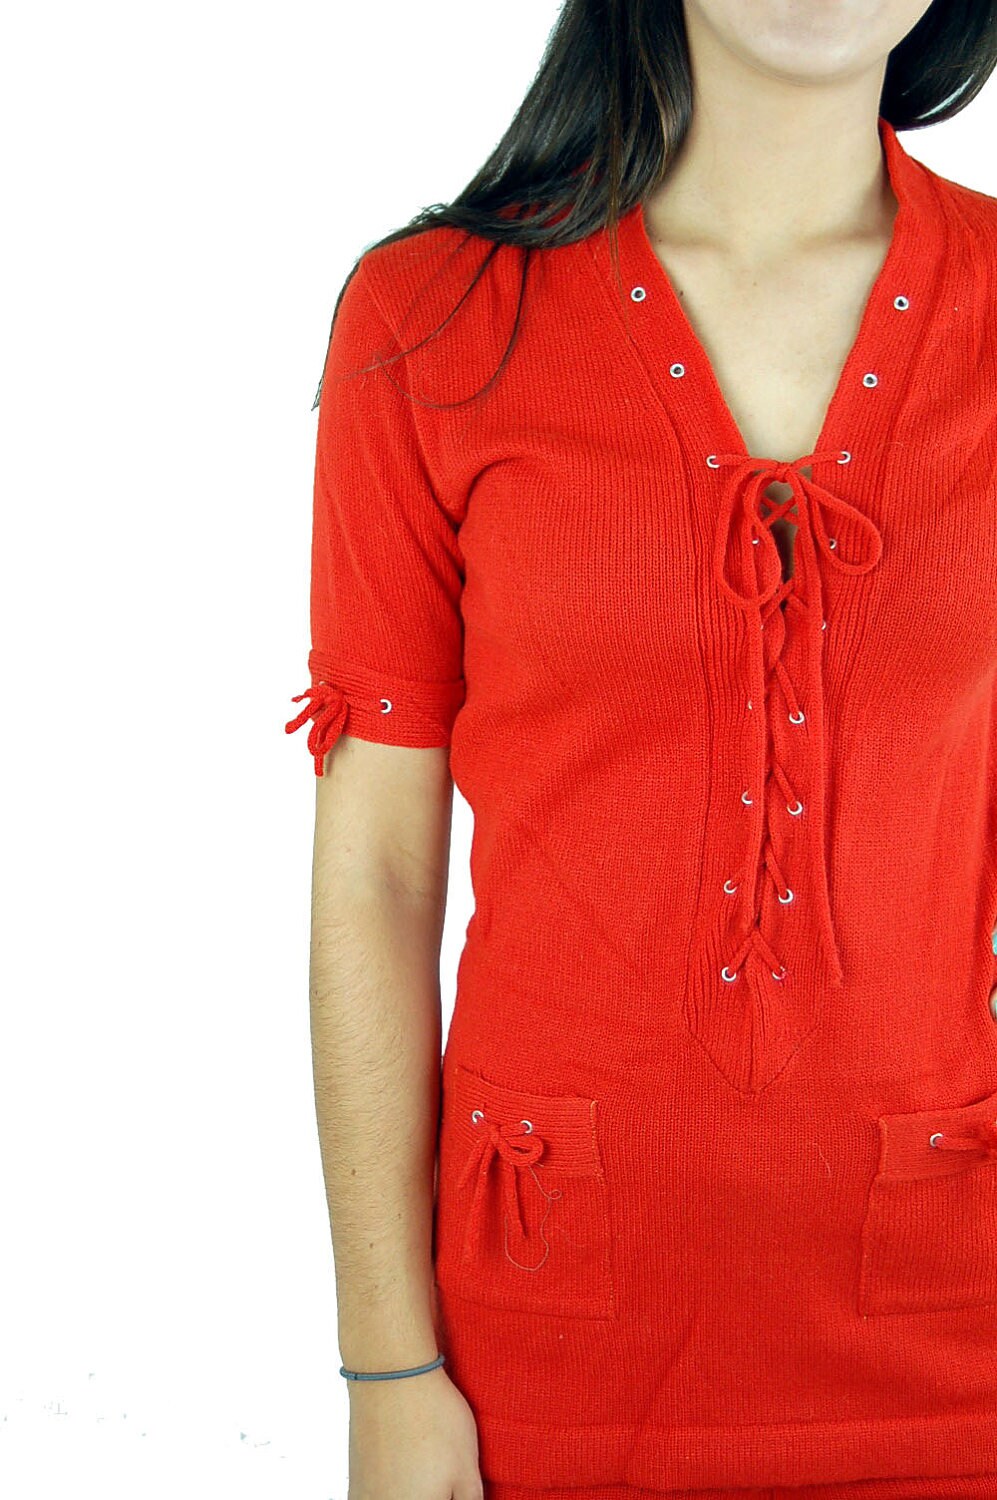 1970s sweater boho tunic top and pants, knit tunic and pants, red lace up top, Size M